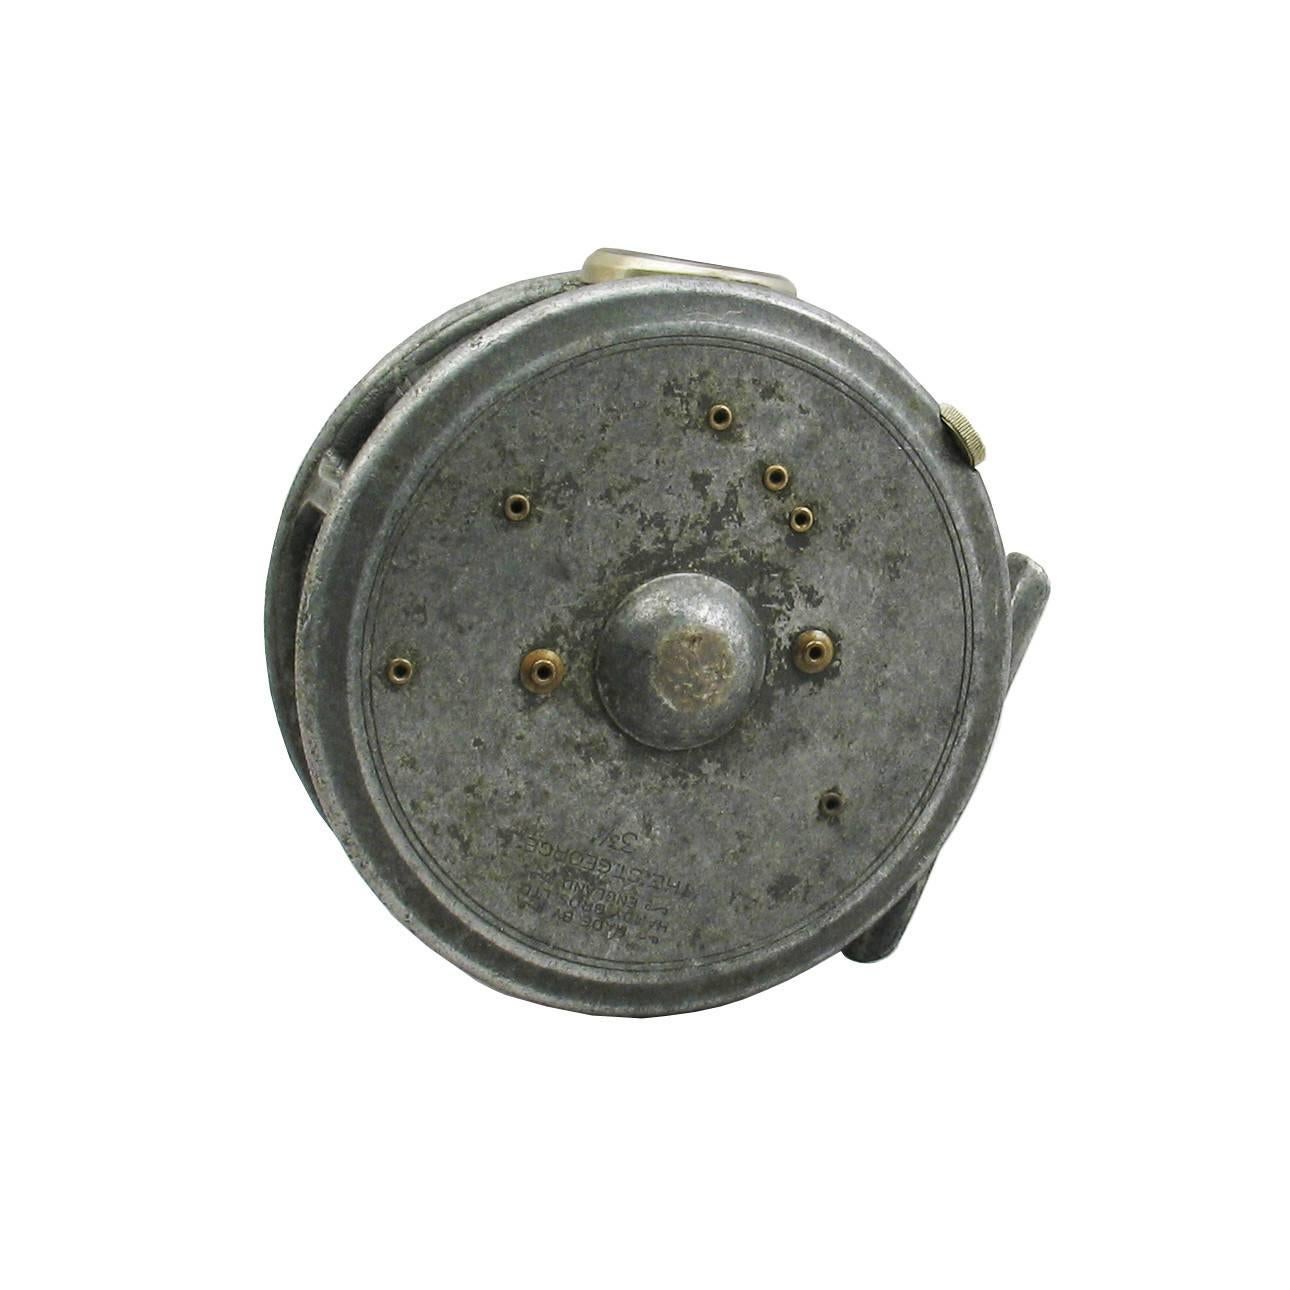 Pryce-Tannatt's personal fishing reel. This is a Hardy St. George alloy trout fly reel, it has a smooth agate line guide, rim tension regulator, brass foot modified two screw drum latch, smooth check, black handle and retains some original grey